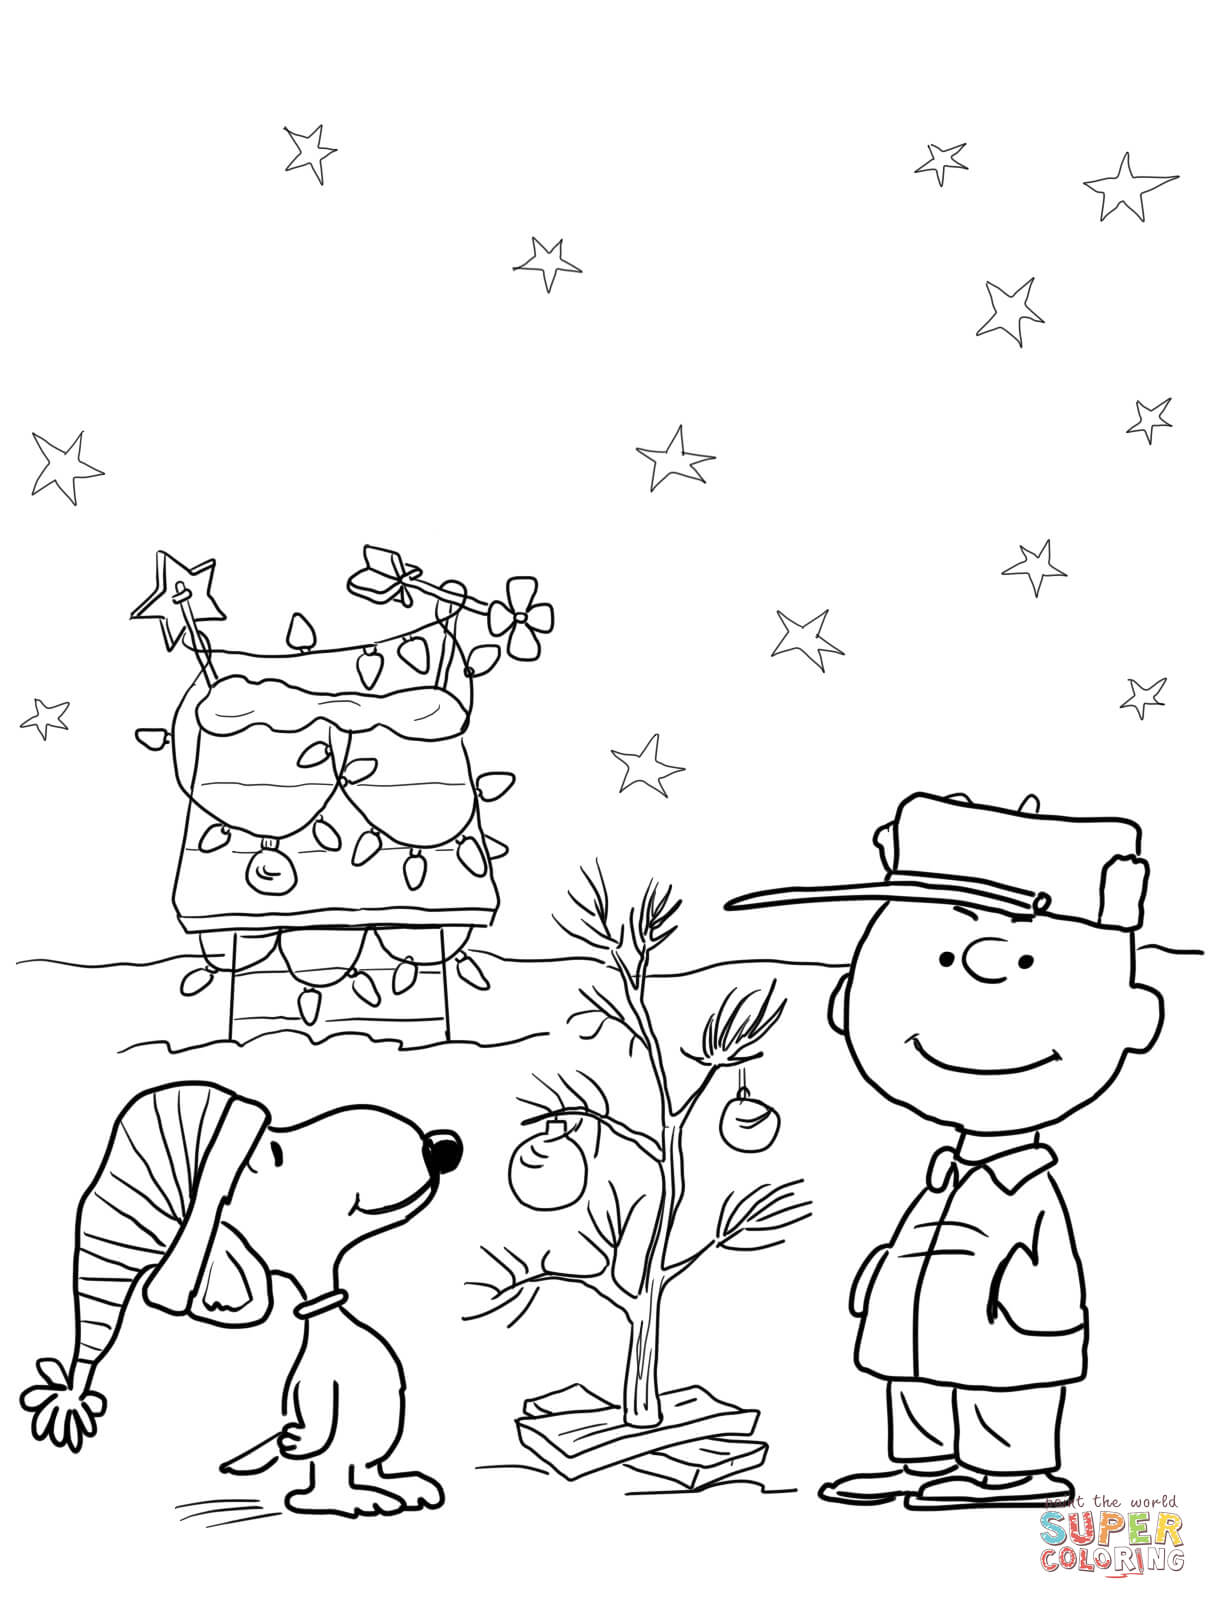 Charlie brown christmas coloring page free printable coloring pages